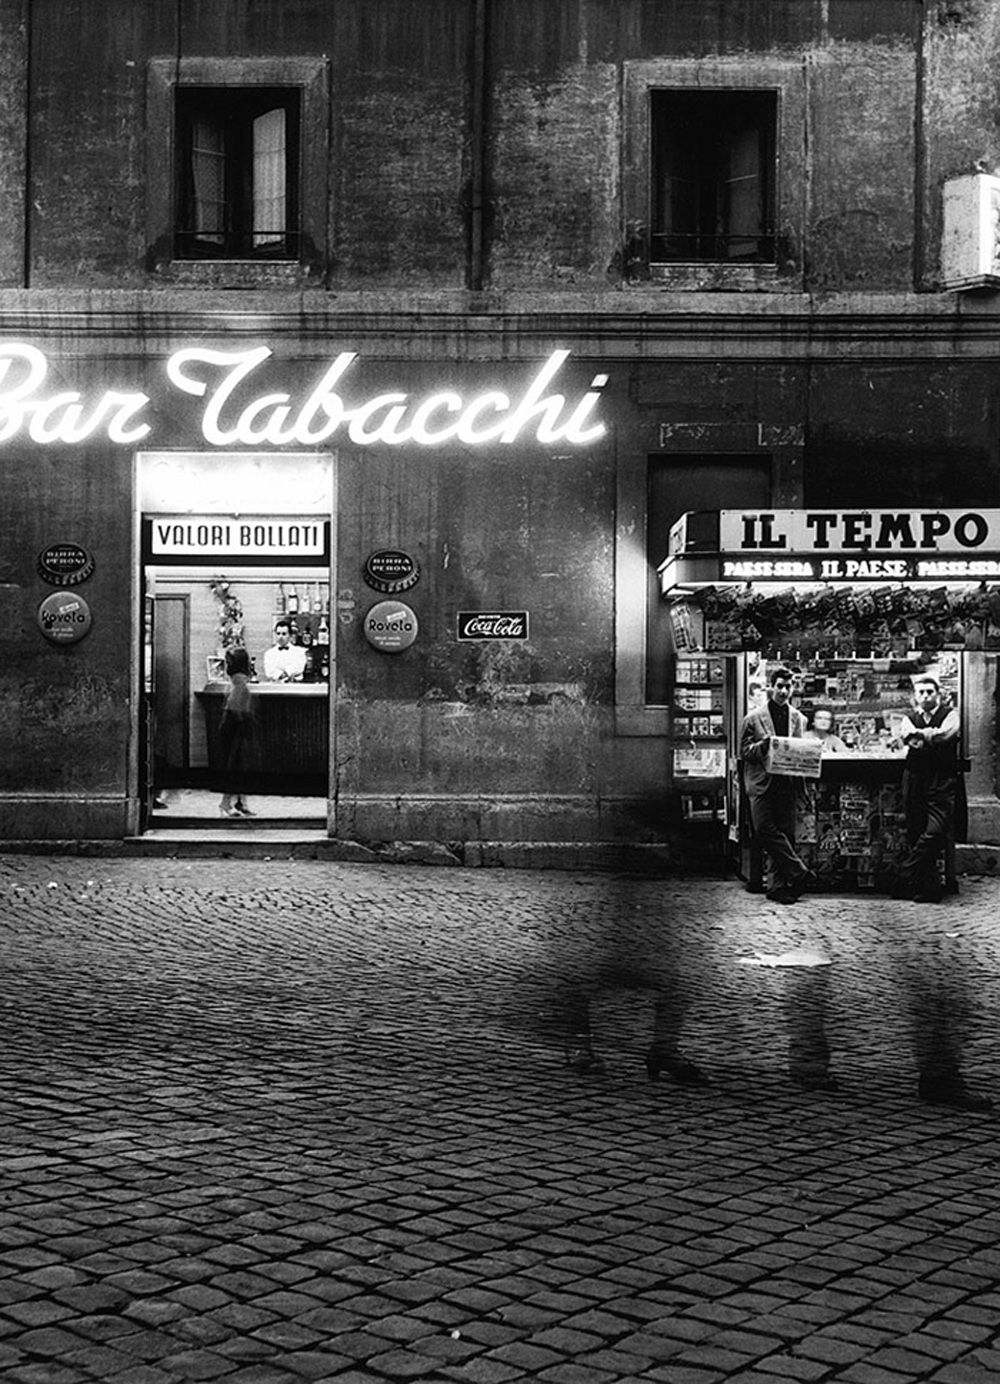 Paris Photo:  William Klein Summer evening, via di Monserrato, Rome, 1956 Gelatin silve print, printed later WILLIAM KLEIN/GALLERY FIFTY ONE Exhibitor: GALLERY FIFTY ONE